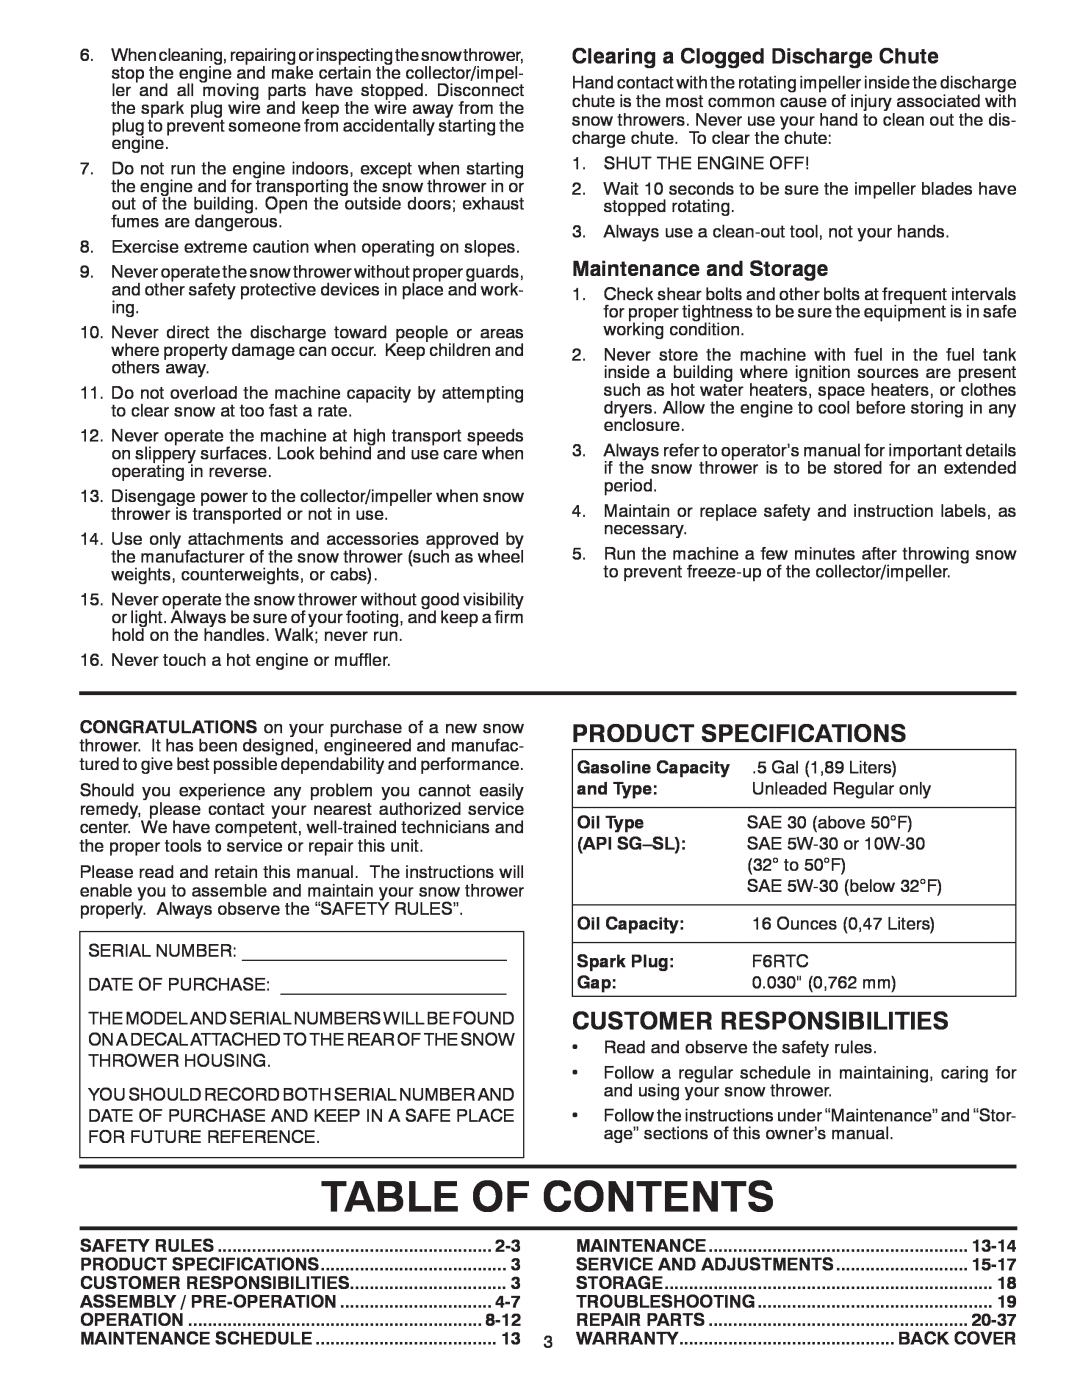 McCulloch 96192004101 Table Of Contents, Product Specifications, Customer Responsibilities, Maintenance and Storage, 13-14 